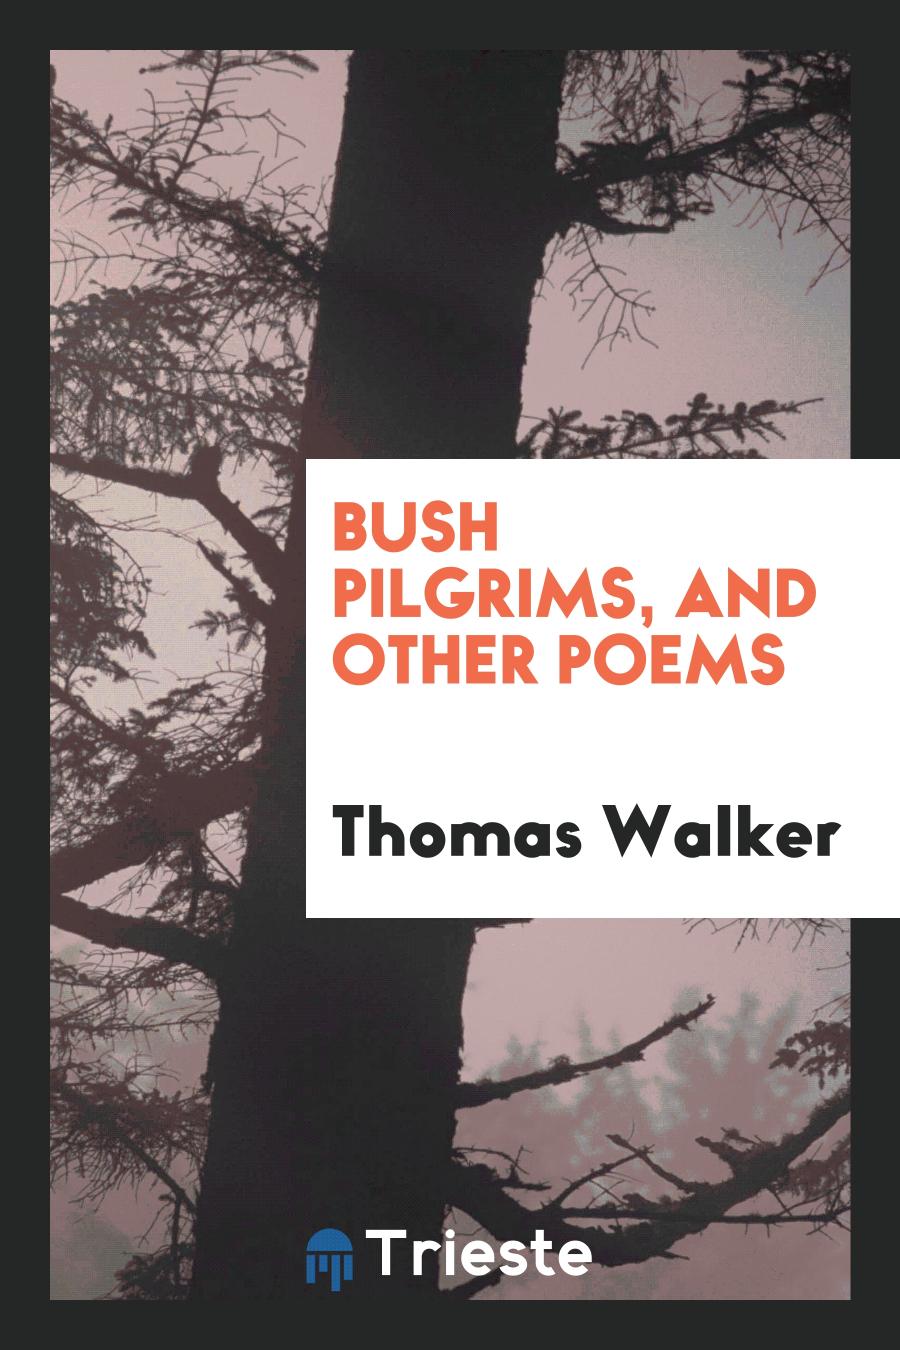 Bush Pilgrims, and Other Poems